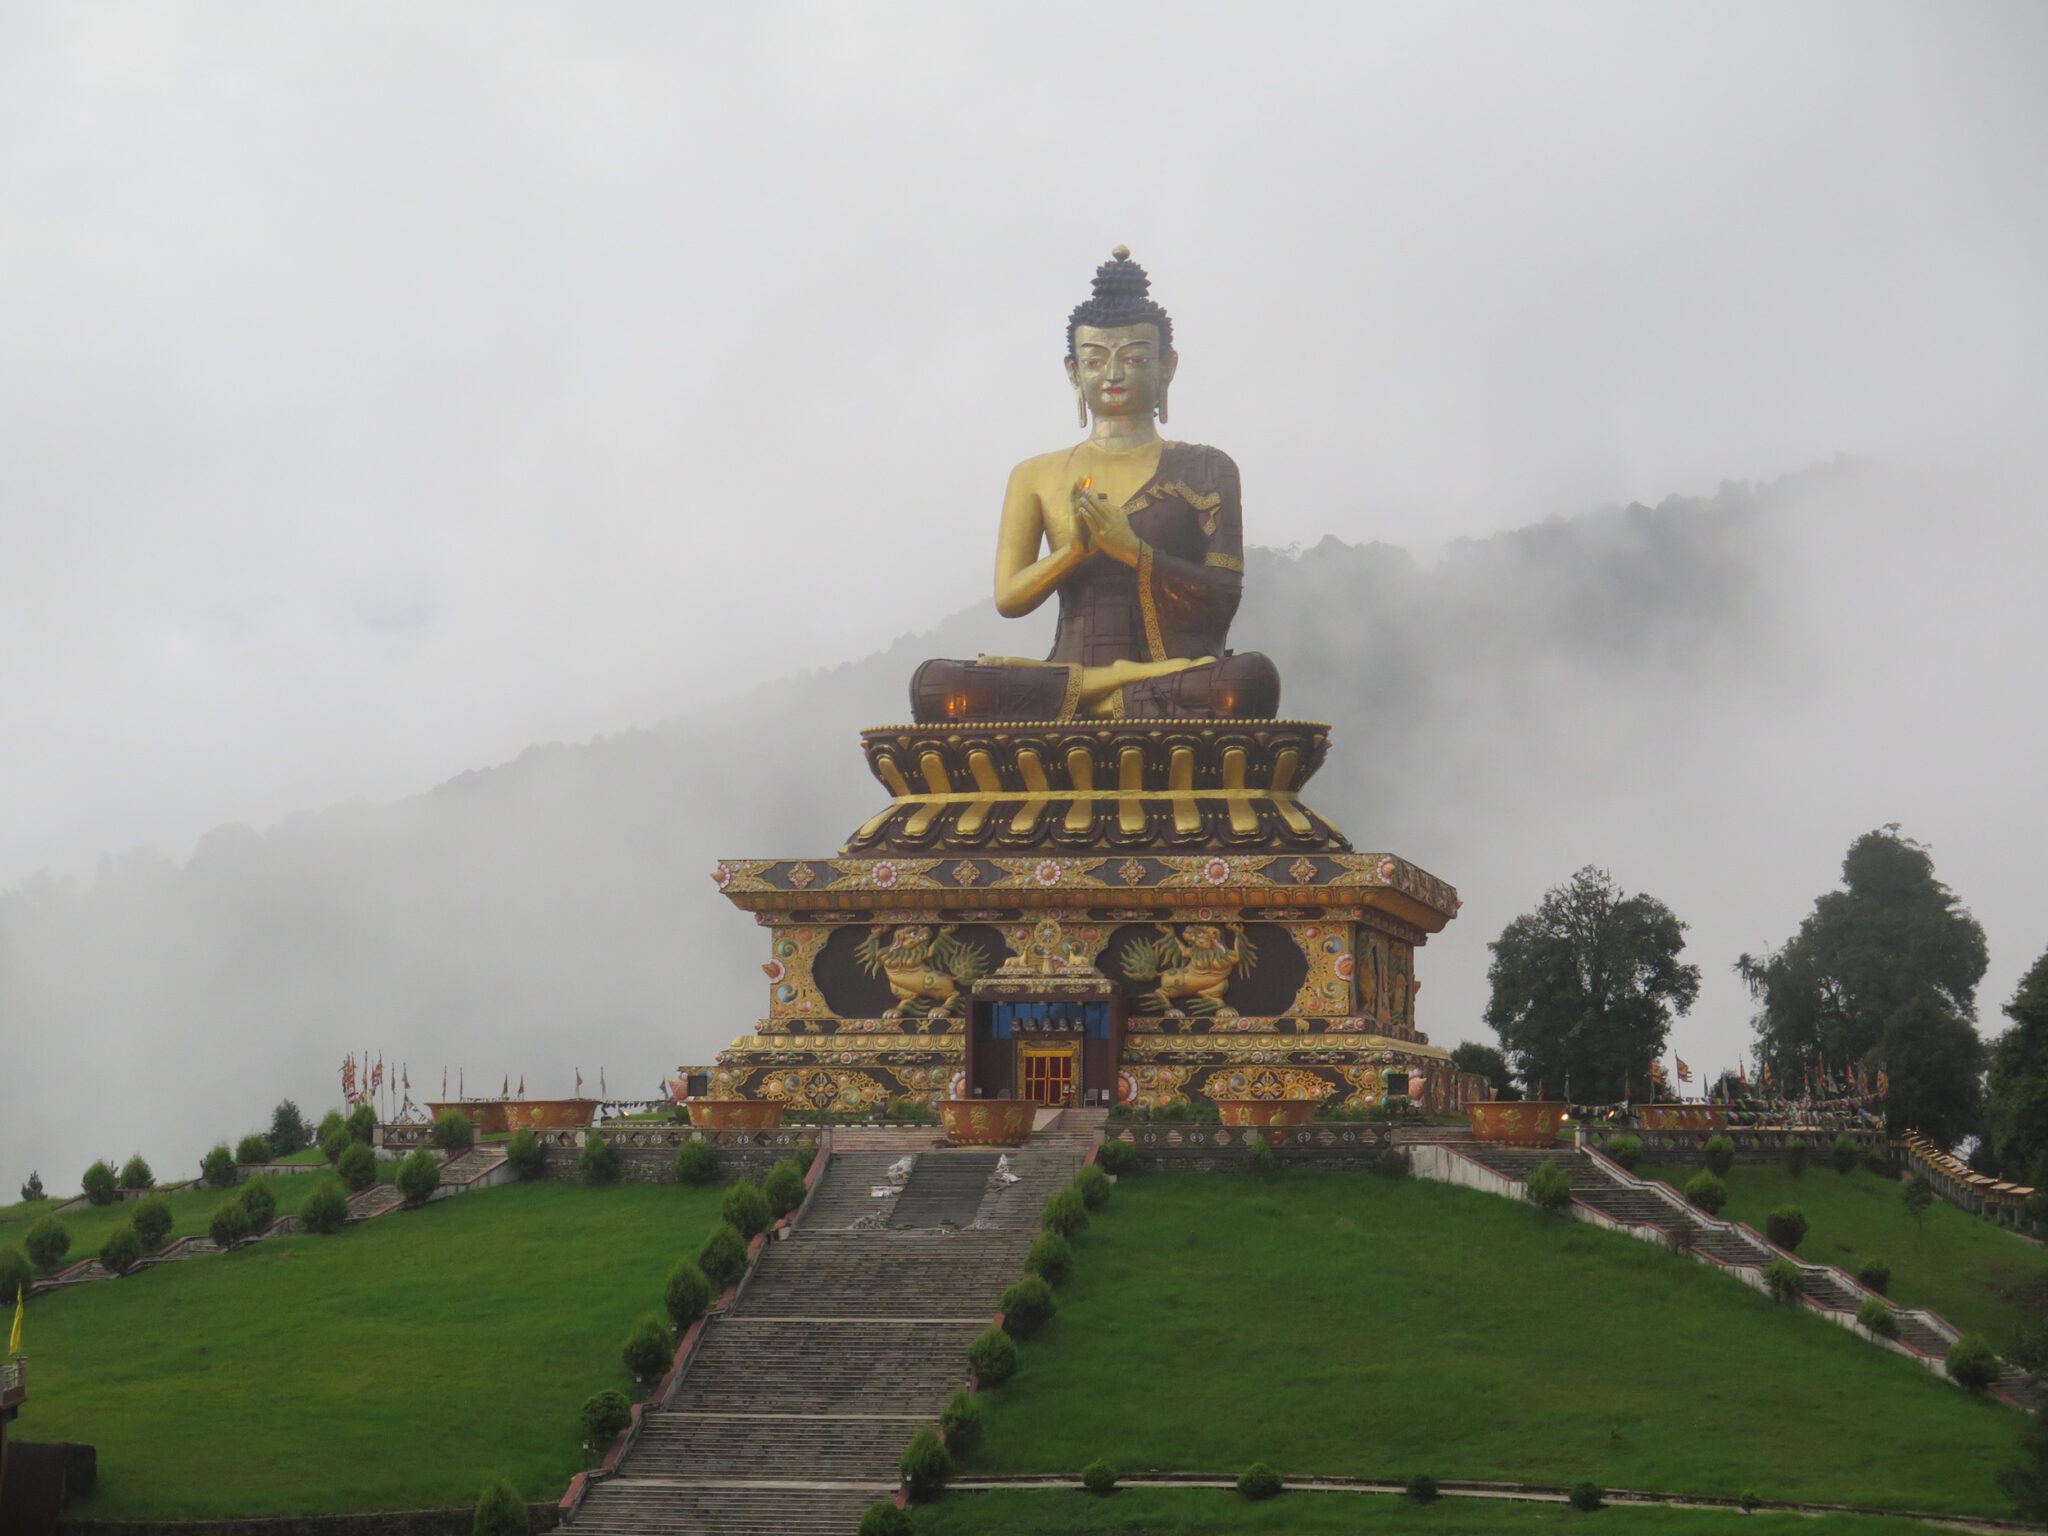 Colossal statue depicting golden Buddha seated atop plinth; situated on hilltop before clouded mountainside